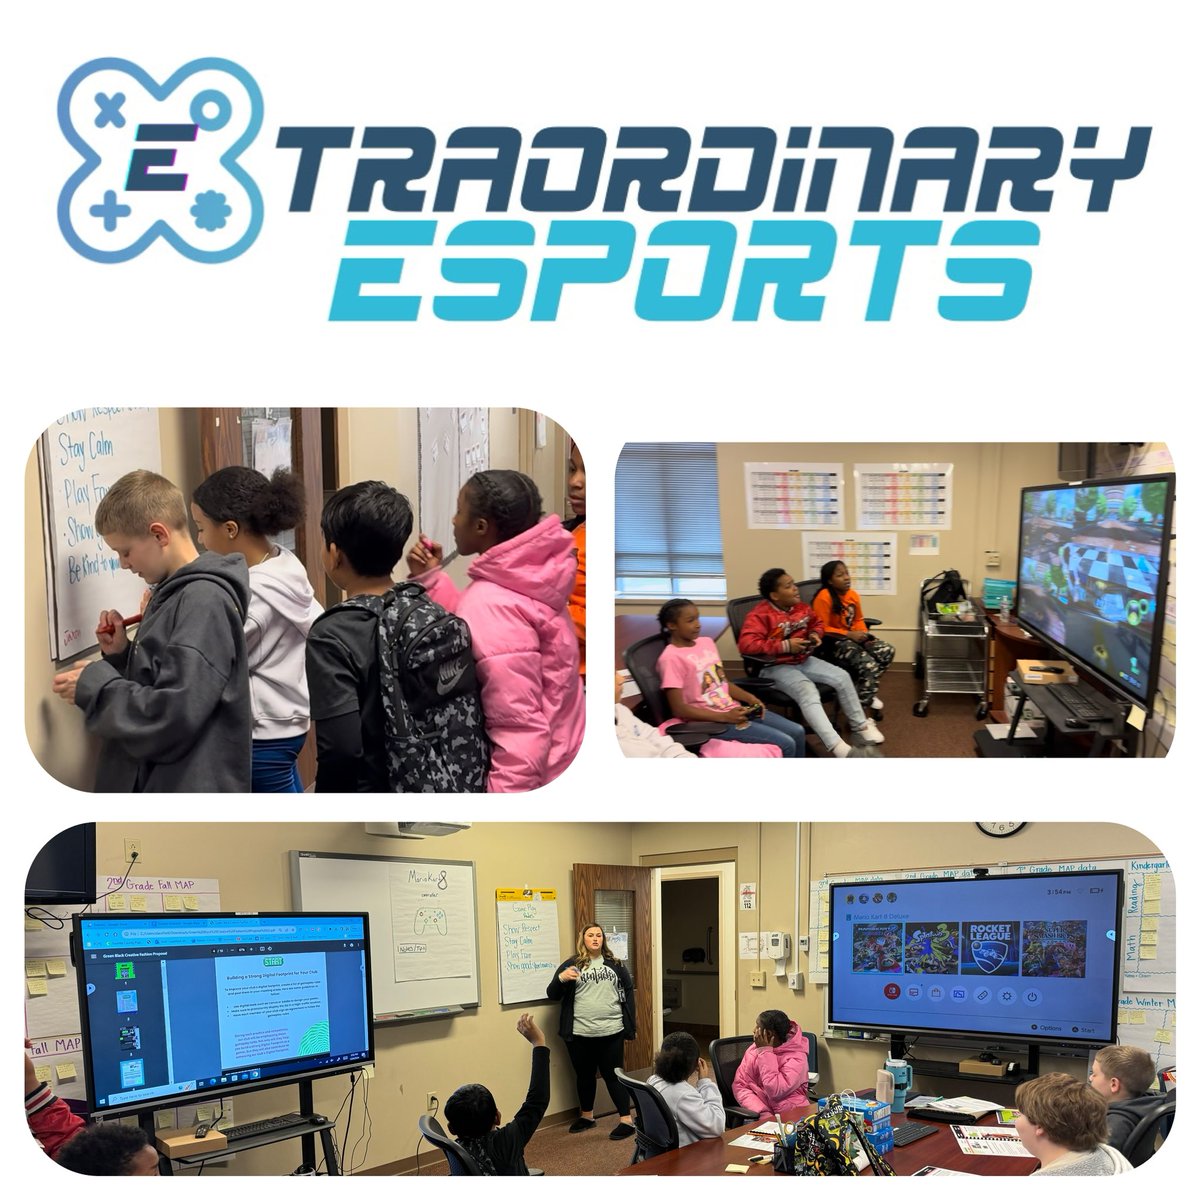 Mary Todd hosts their #Esports practice in the teachers conference room! Shout out to Mary Todd and their administrators for supporting Esports. This club is using @ViewSonic IFP’s, @NitendoSwitch and teaching kids Digital Citizenship when gaming 🎮